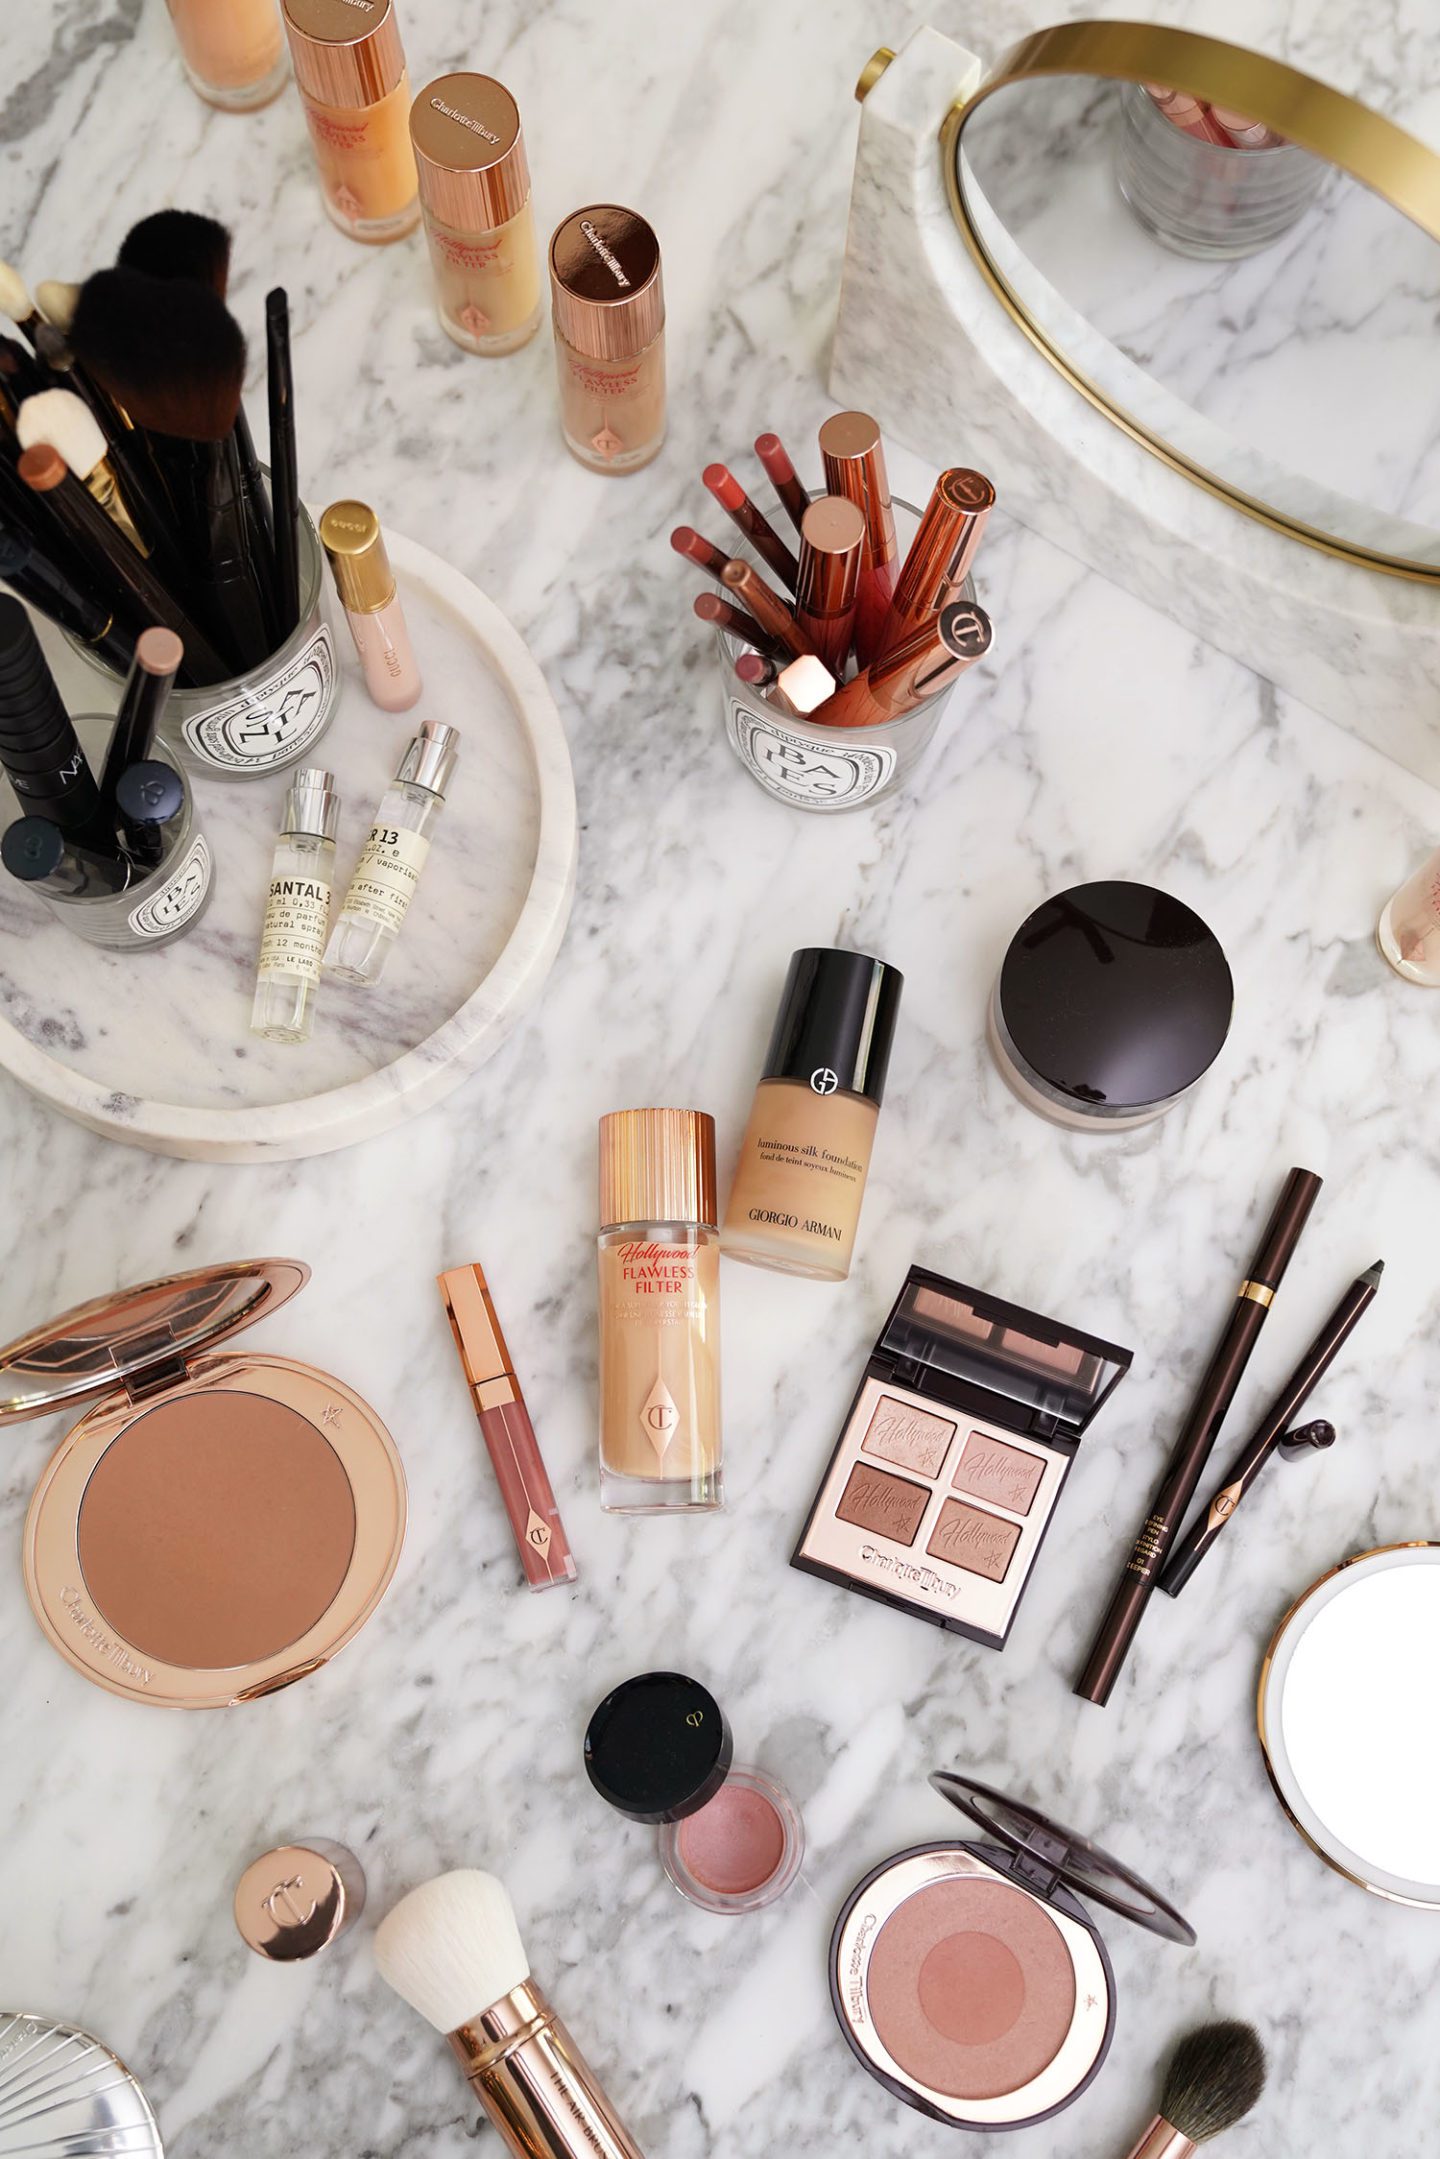 Glowy Makeup Favorites from Nordstrom